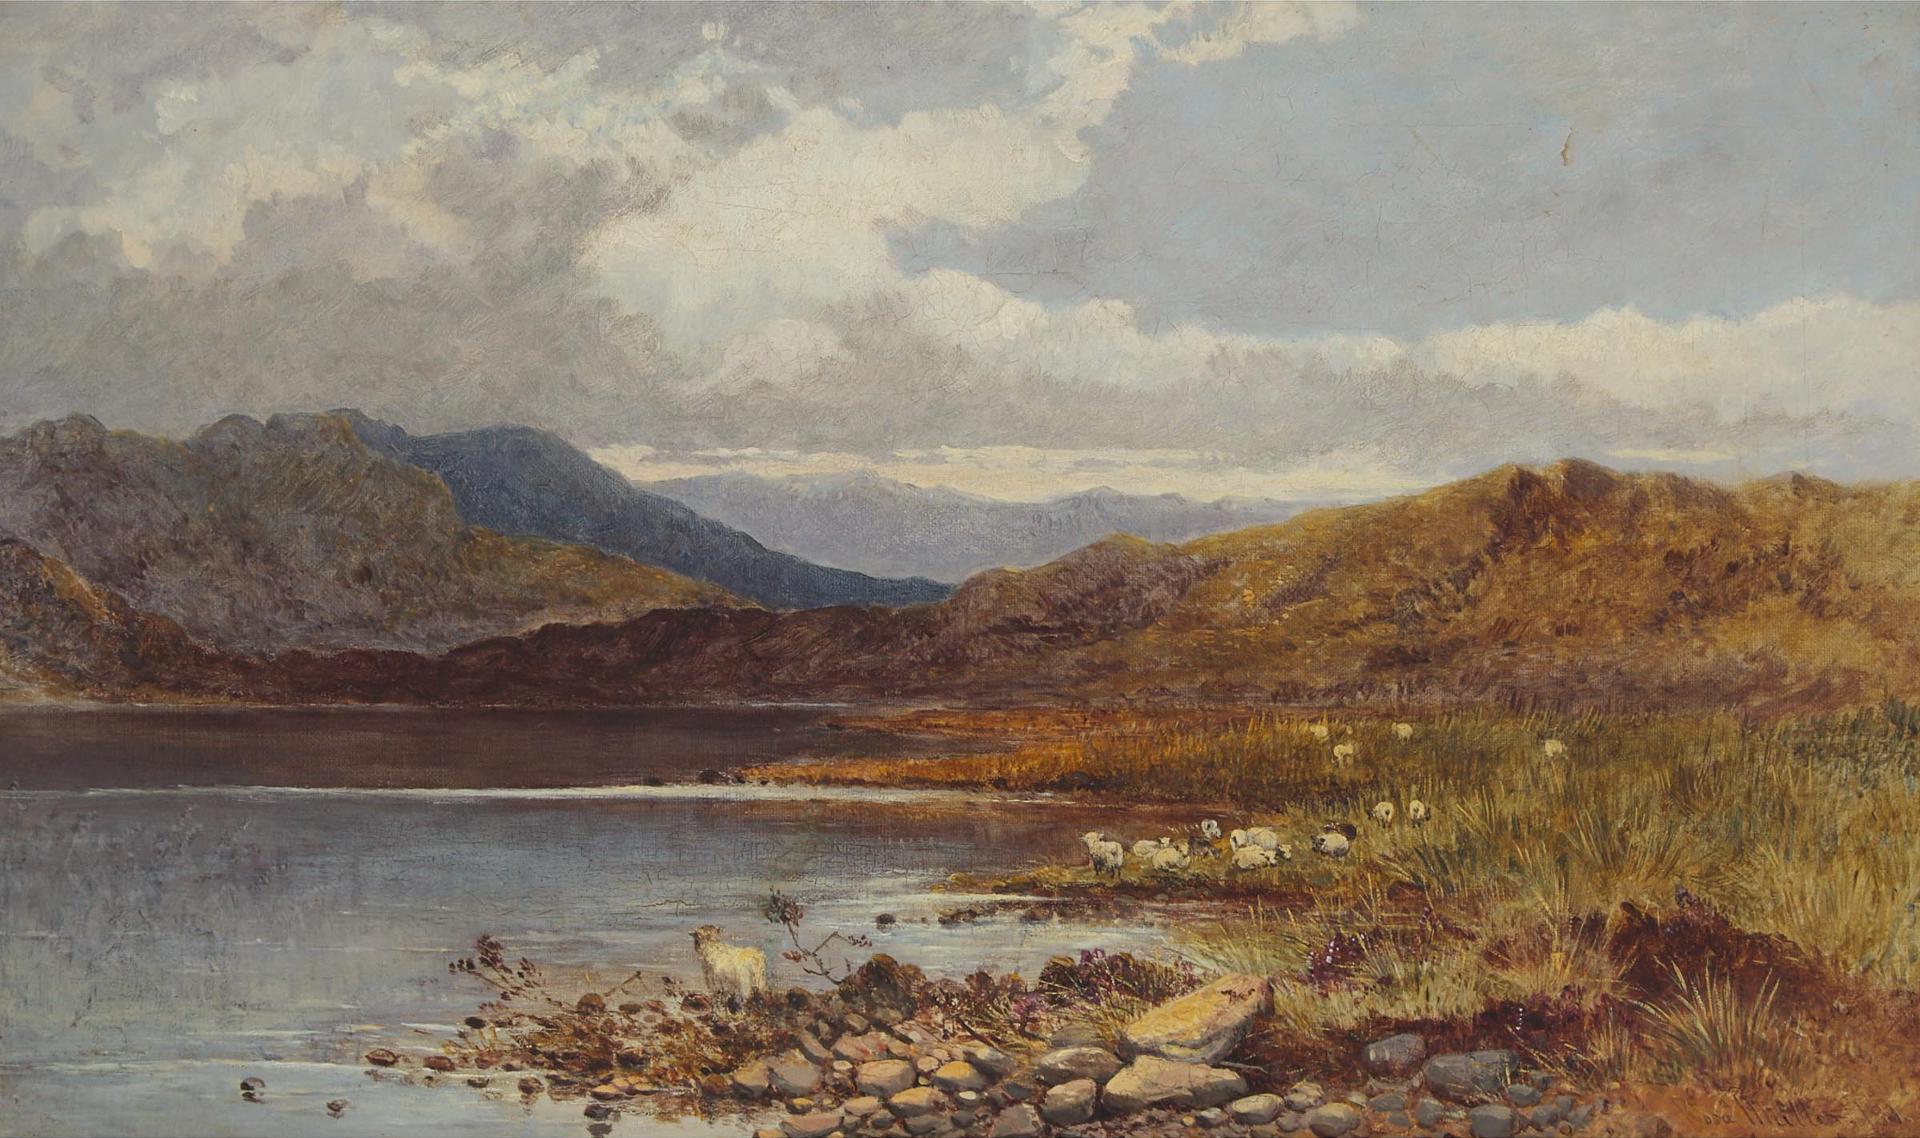 Rosa Müller (1866-1880) - Sheep Grazing In A Highland Lake, 1881